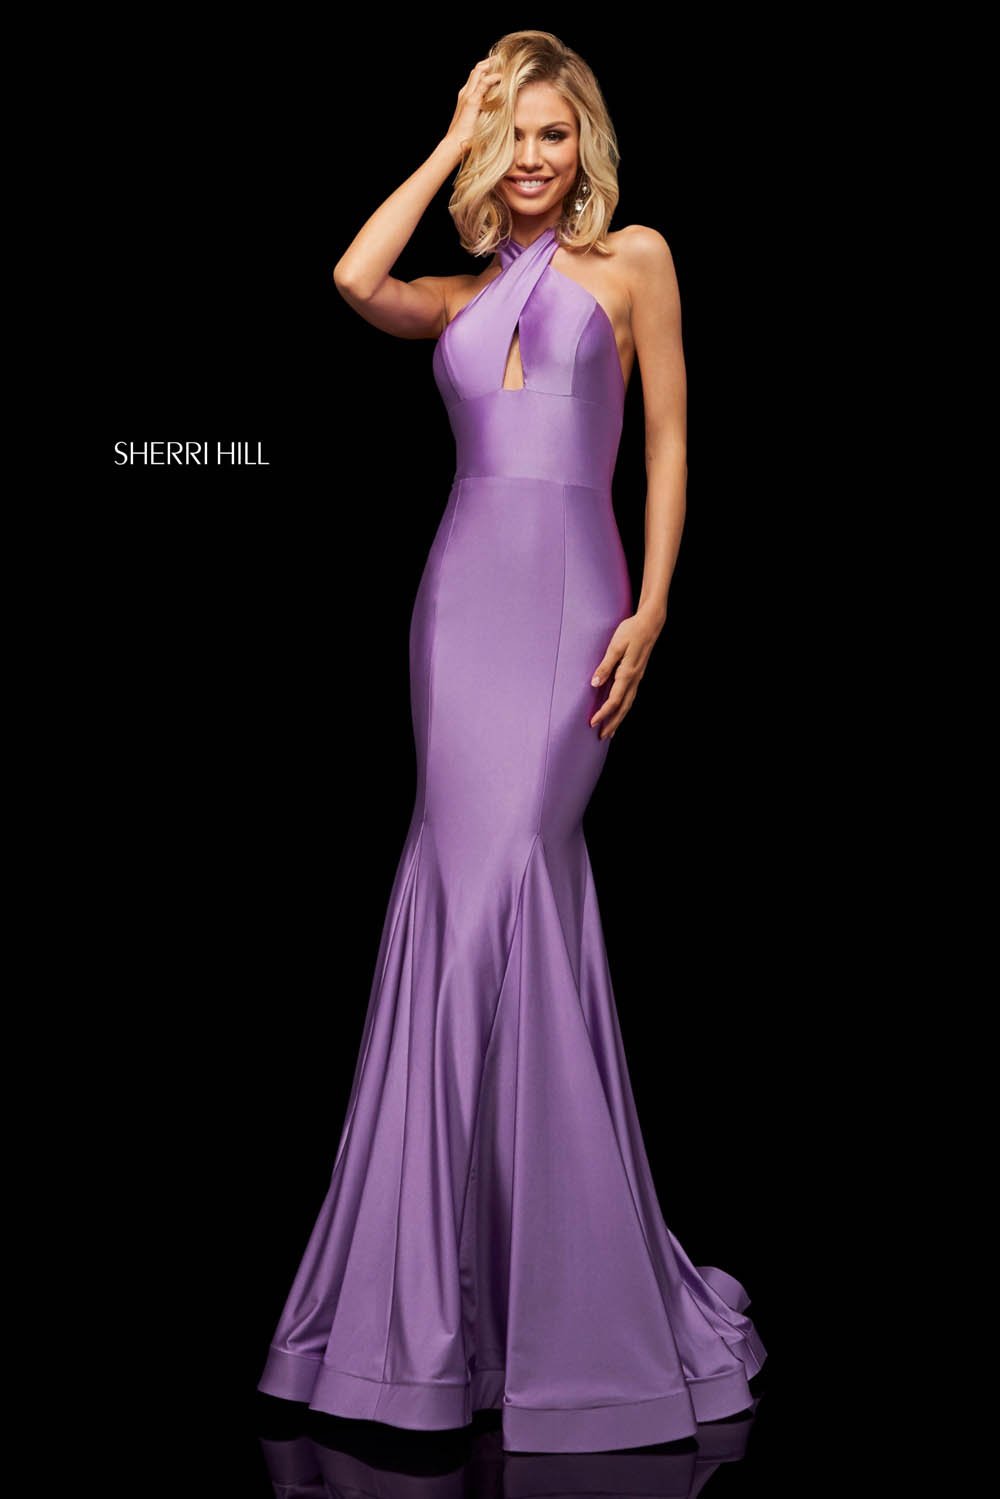 Sherri Hill 52784 dress images in these colors: Navy, Red, Yellow, Blush, Berry, Black, Orchid, Light Blue, Wine, Royal.